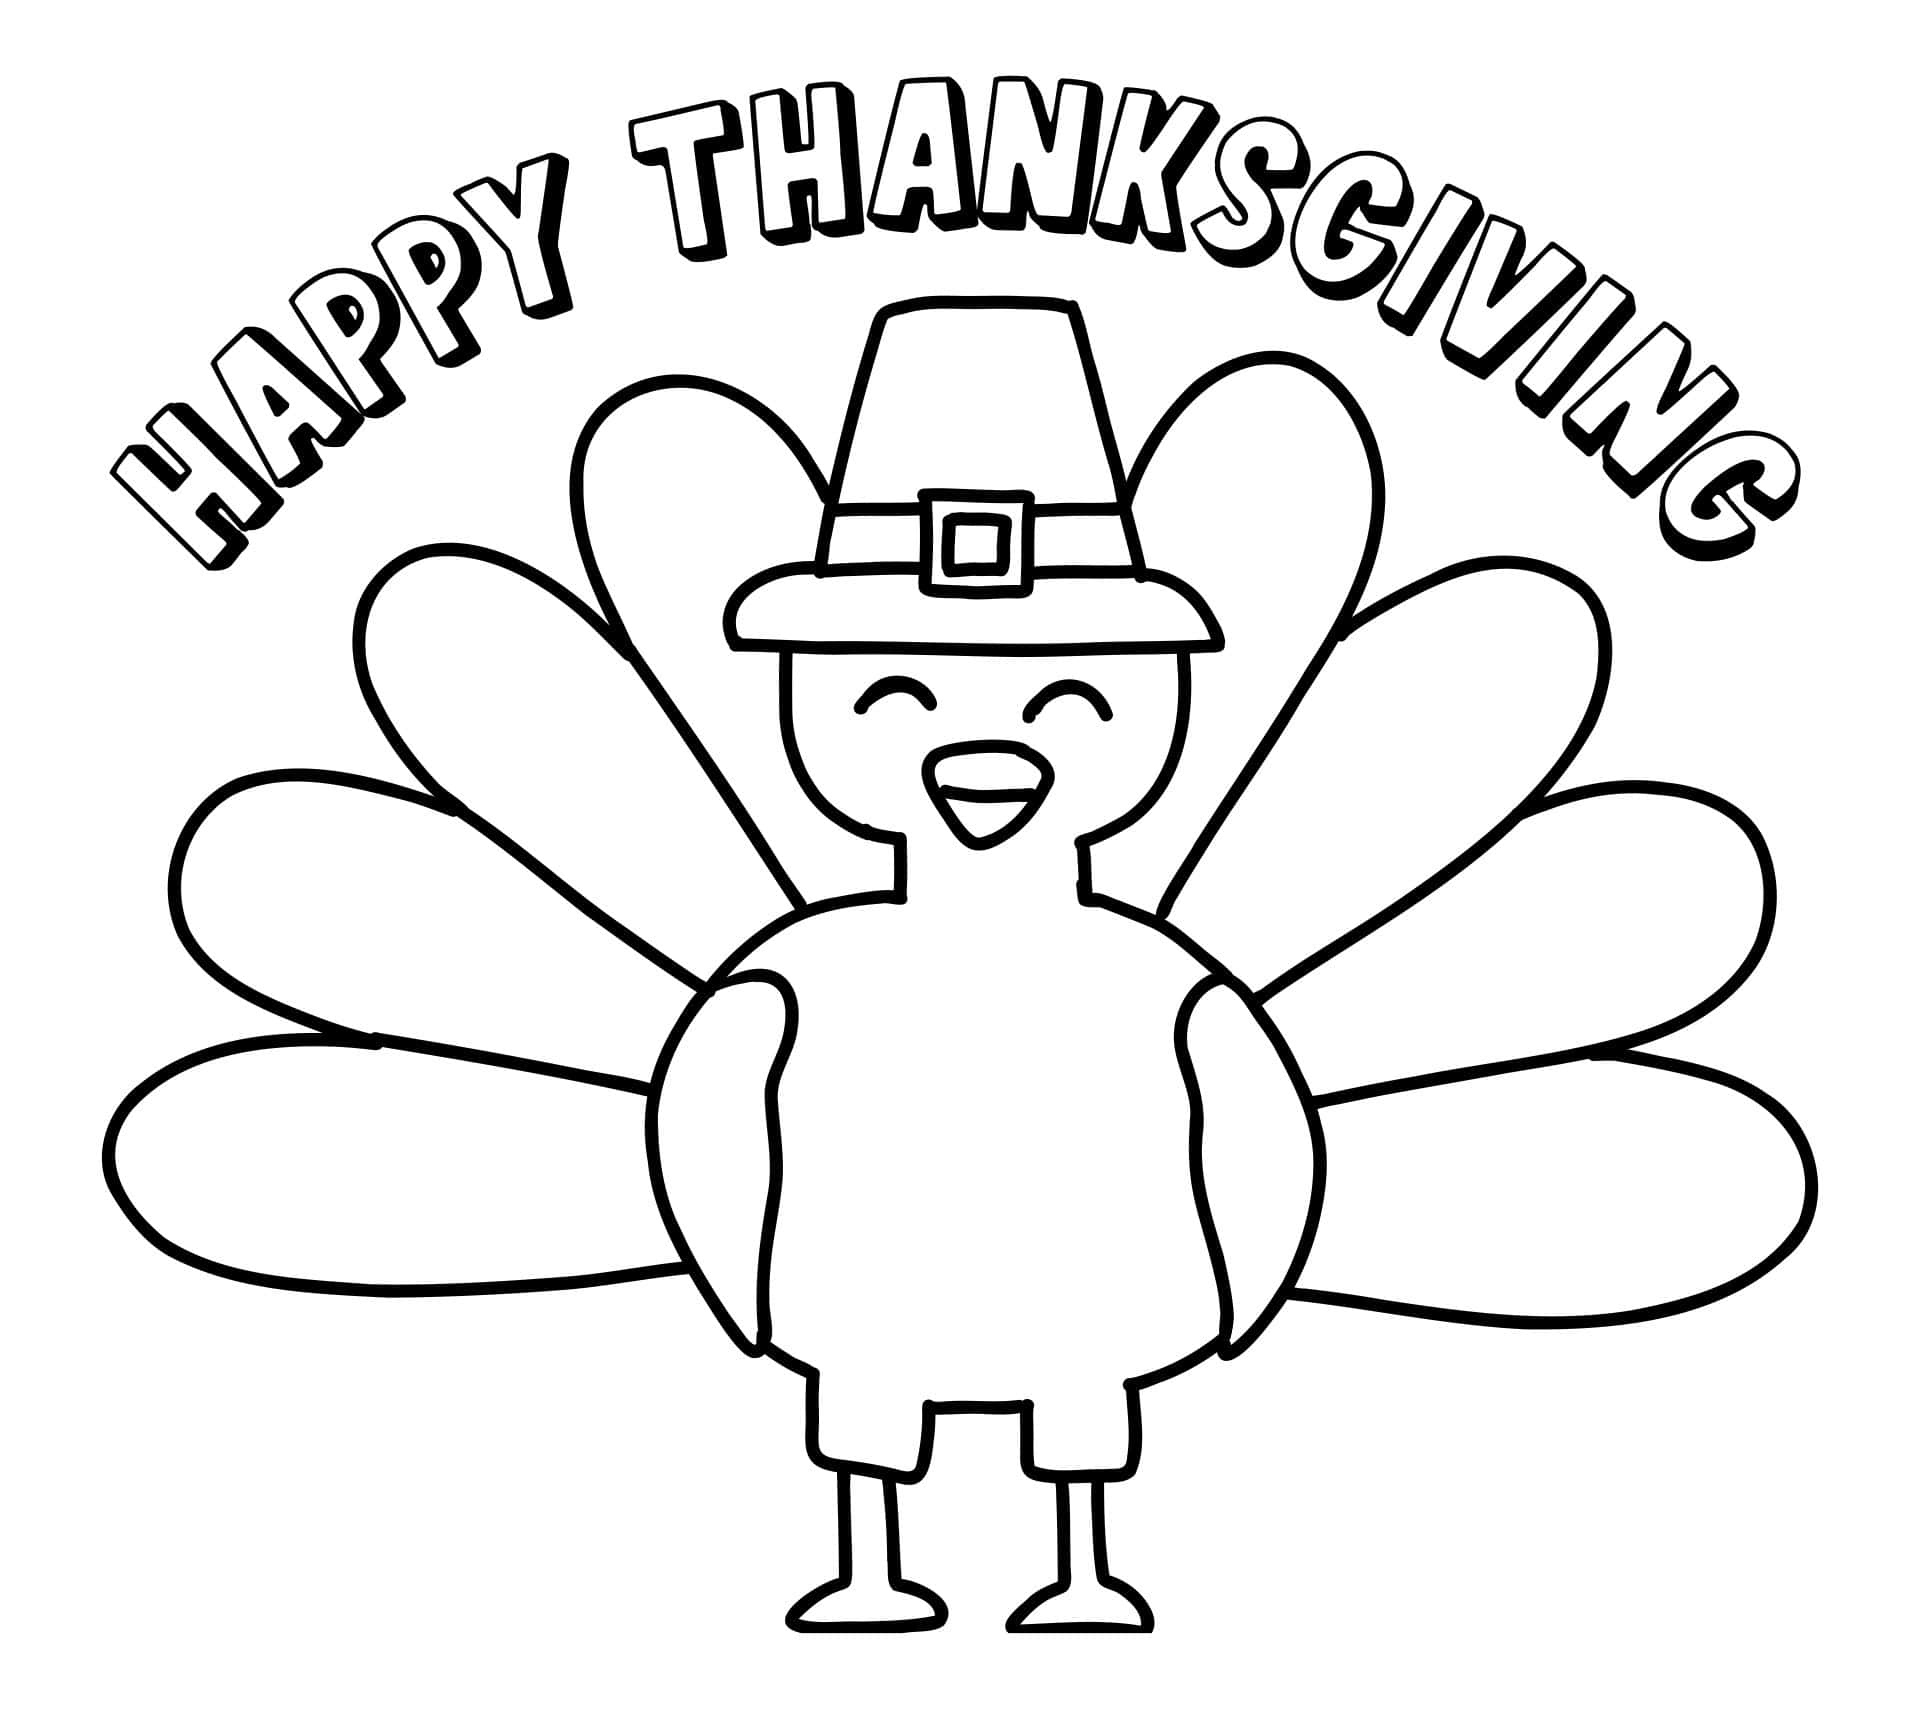 Download thanksgiving coloring pages for kids